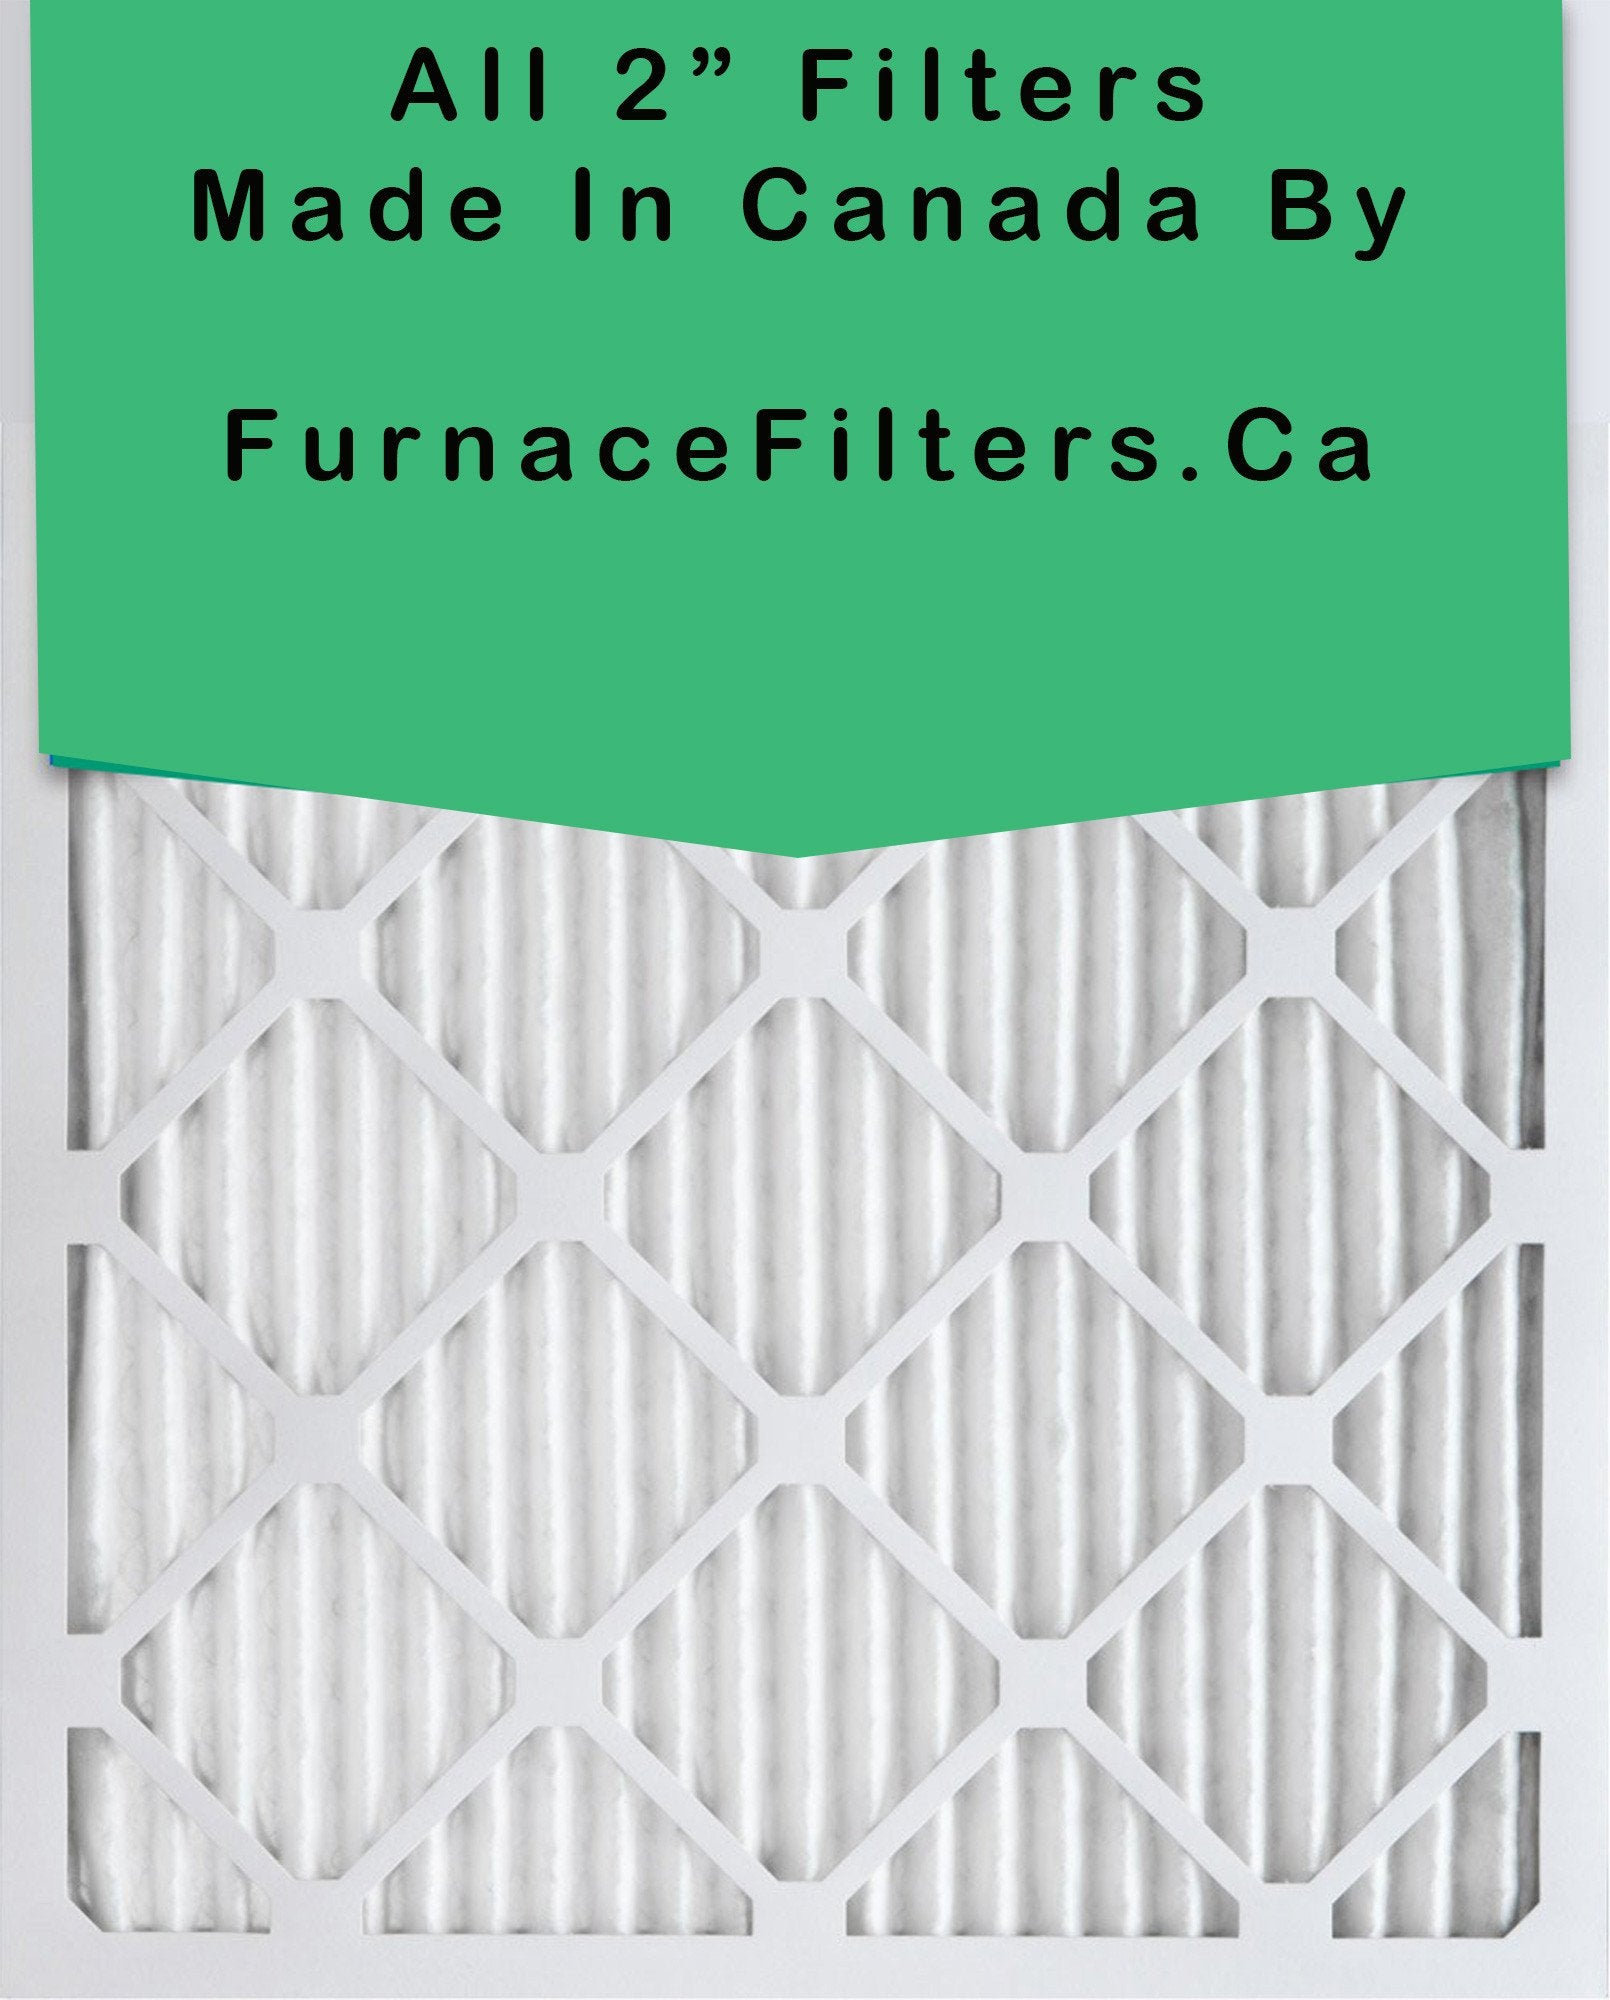 14x16x2 Furnace Filter MERV 8 Pleated Filters. Case of 12